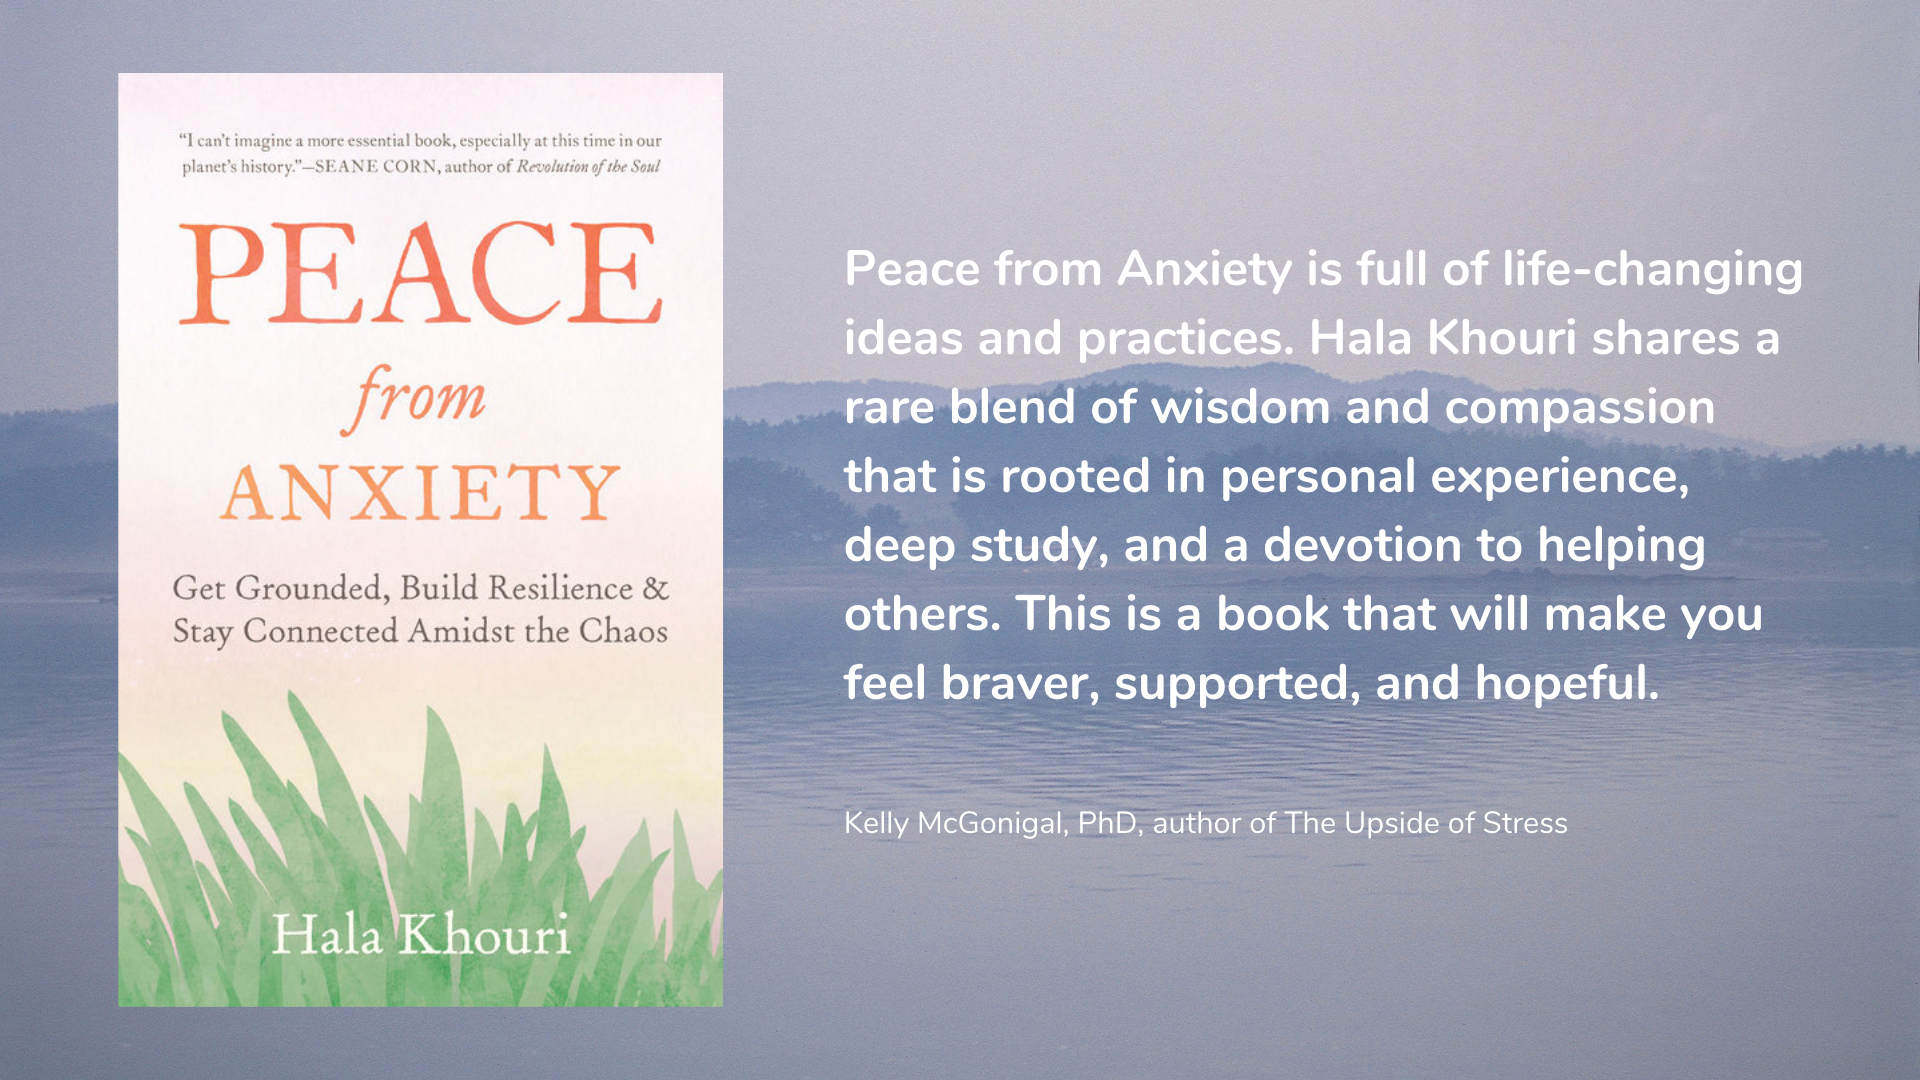 Peace from Anxiety: Get Grounded, Build Resilience, and Stay Connected Amidst the Chaos, book cover and description.